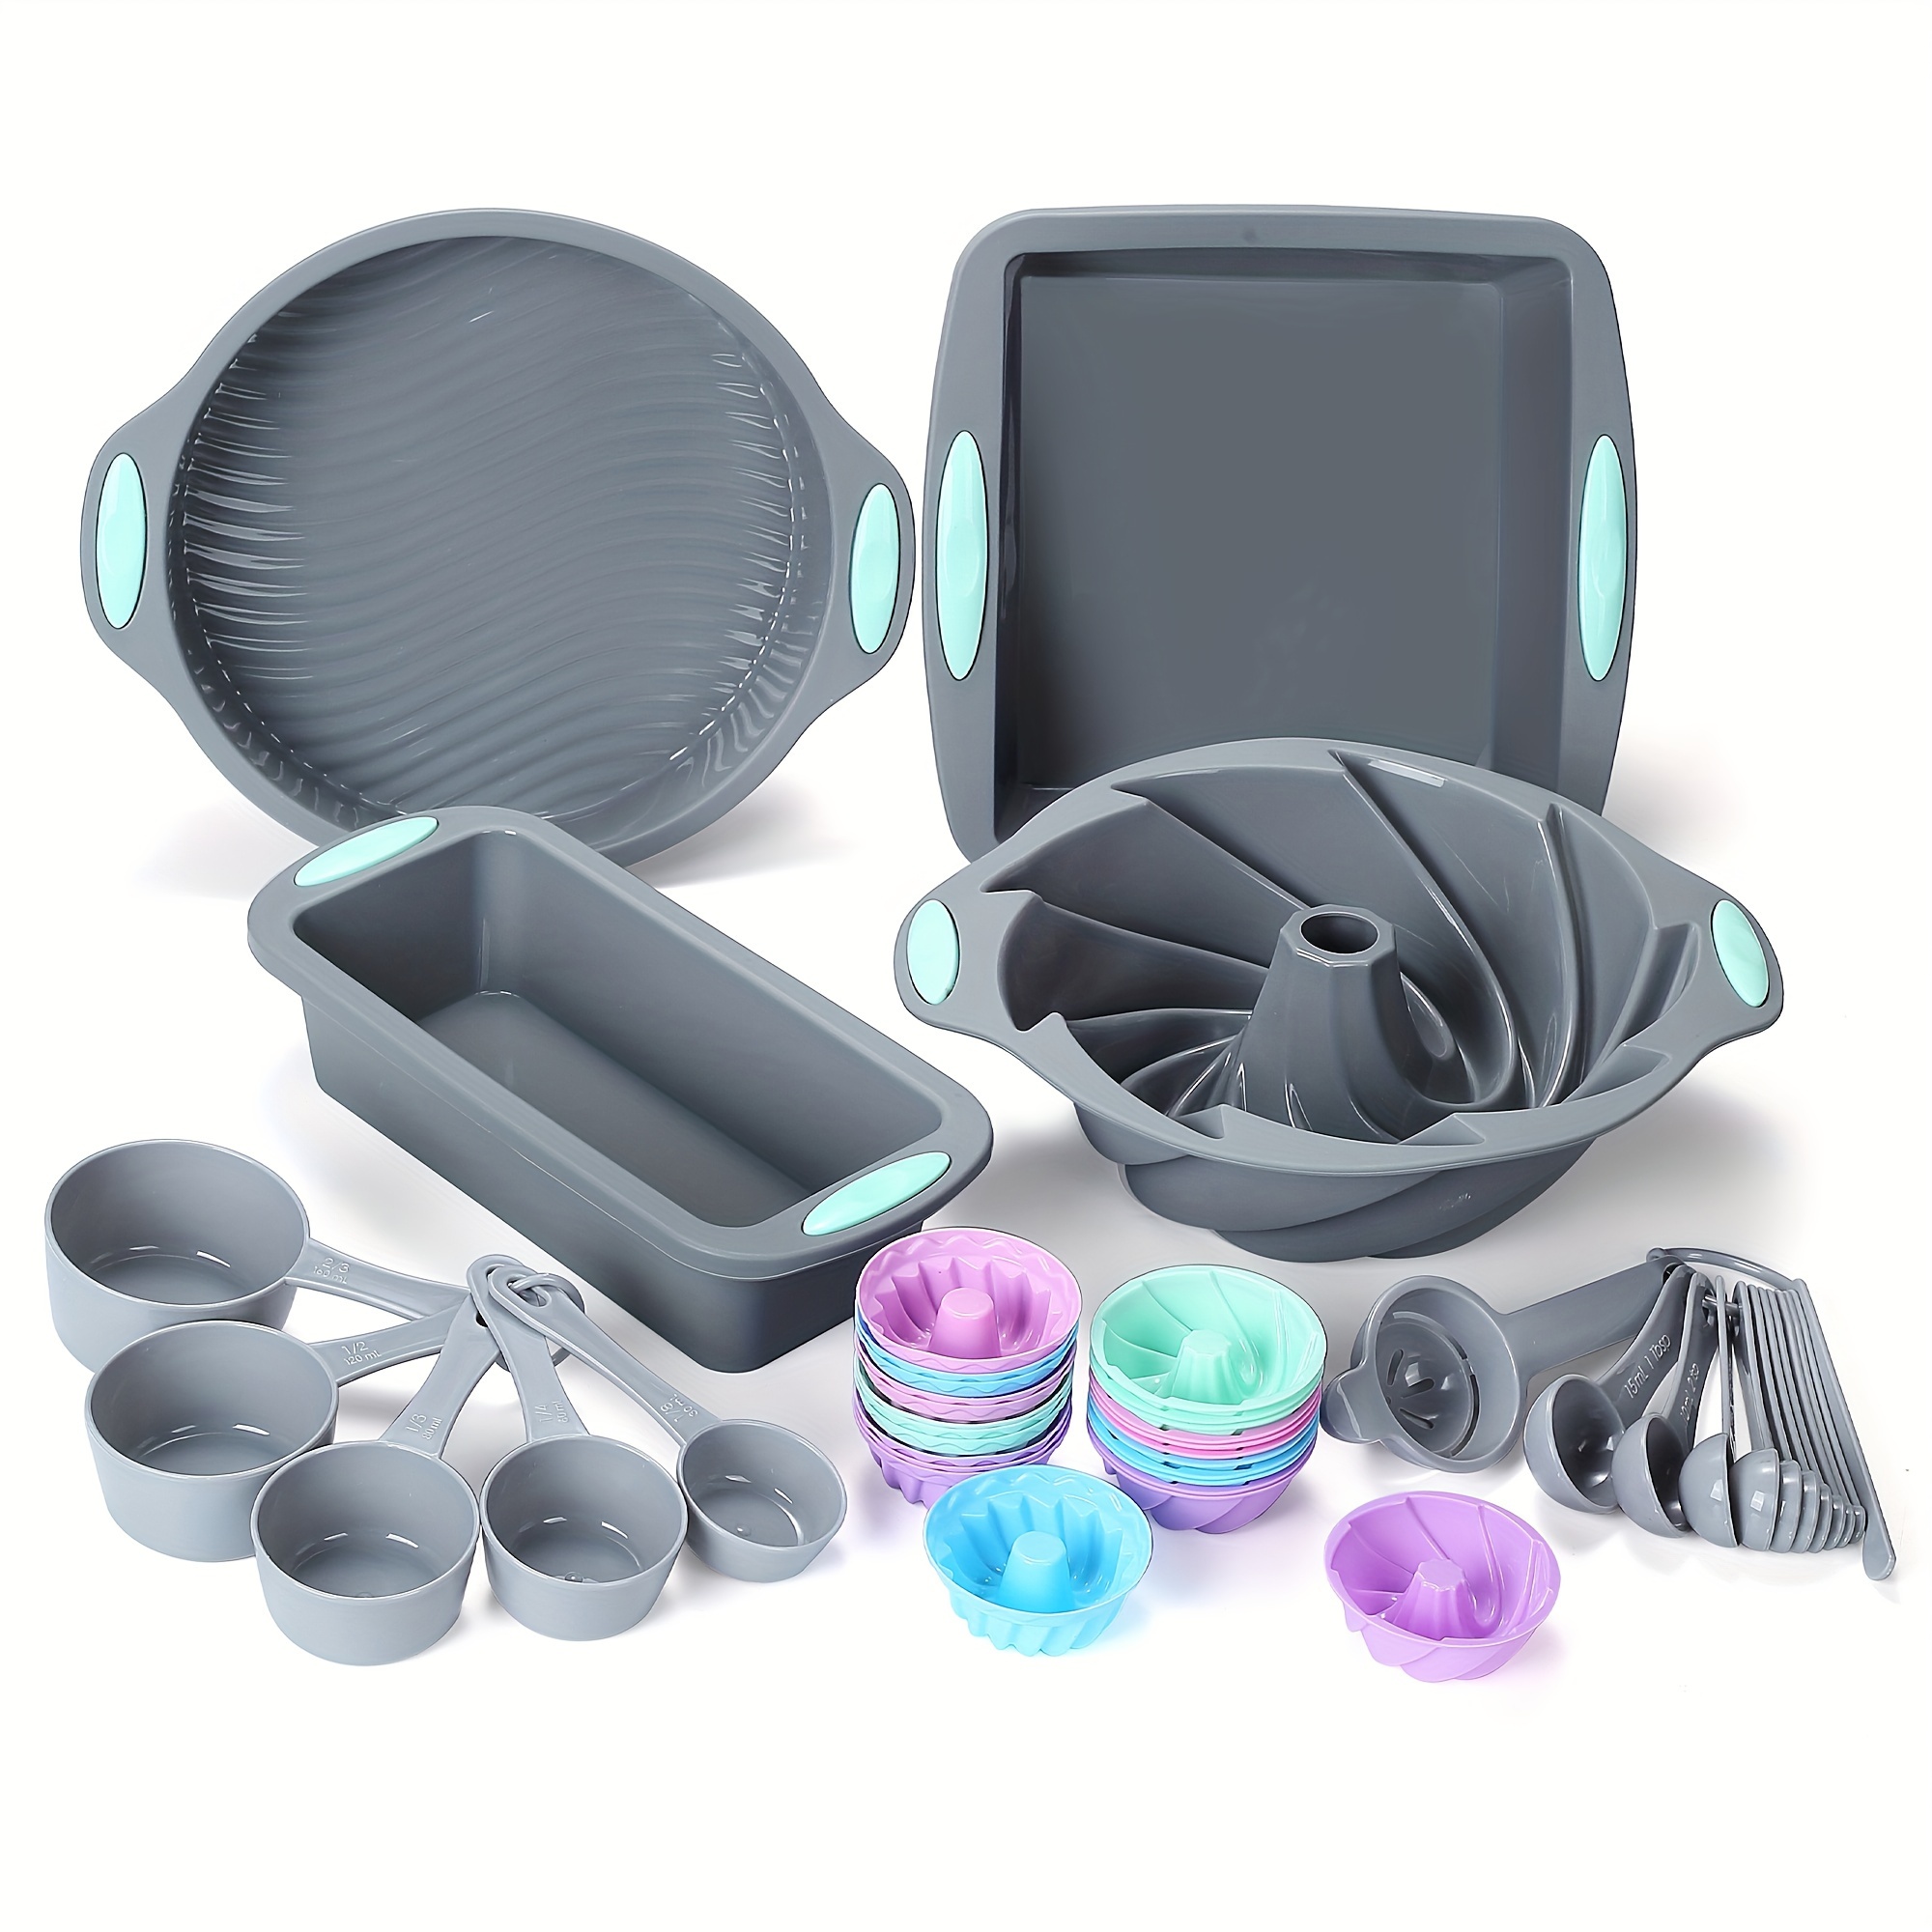  Silicone Bakeware Set, 18-Piece Set including Cupcake Molds, Muffin  Pan, Bread Pan, Cookie Sheet, Bundt Pan, Baking Supplies by Classic  Cuisine: Home & Kitchen